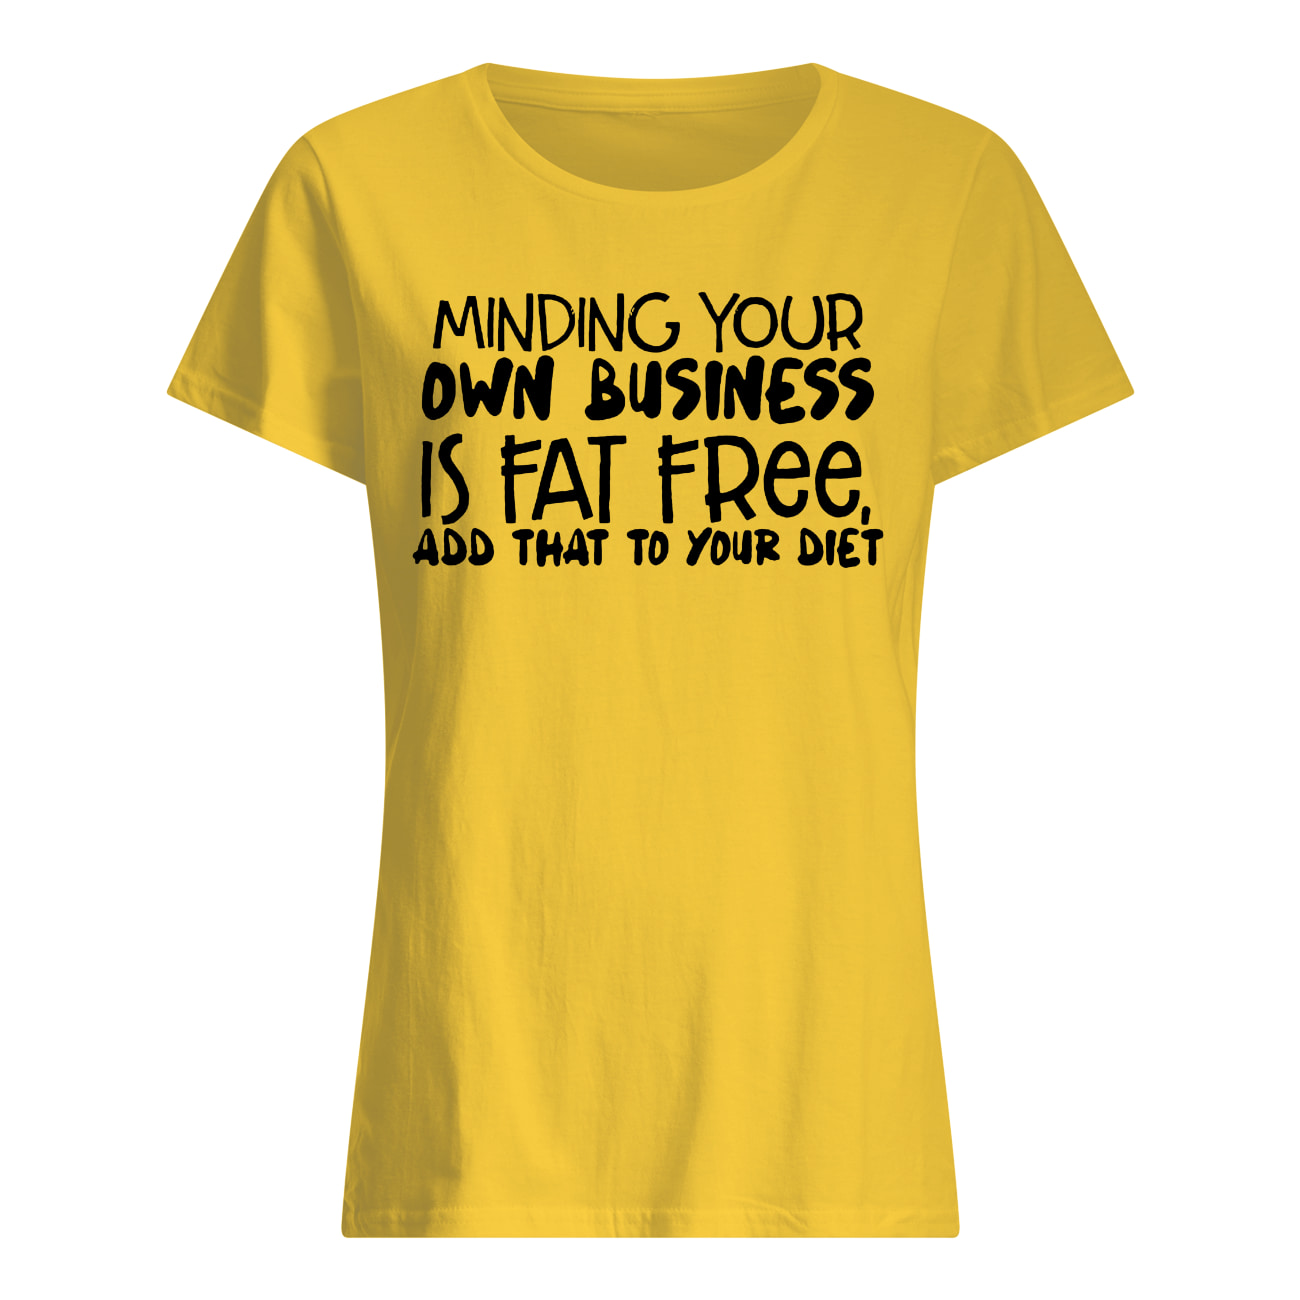 Minding your own business is fat free add that to your diet womens shirt